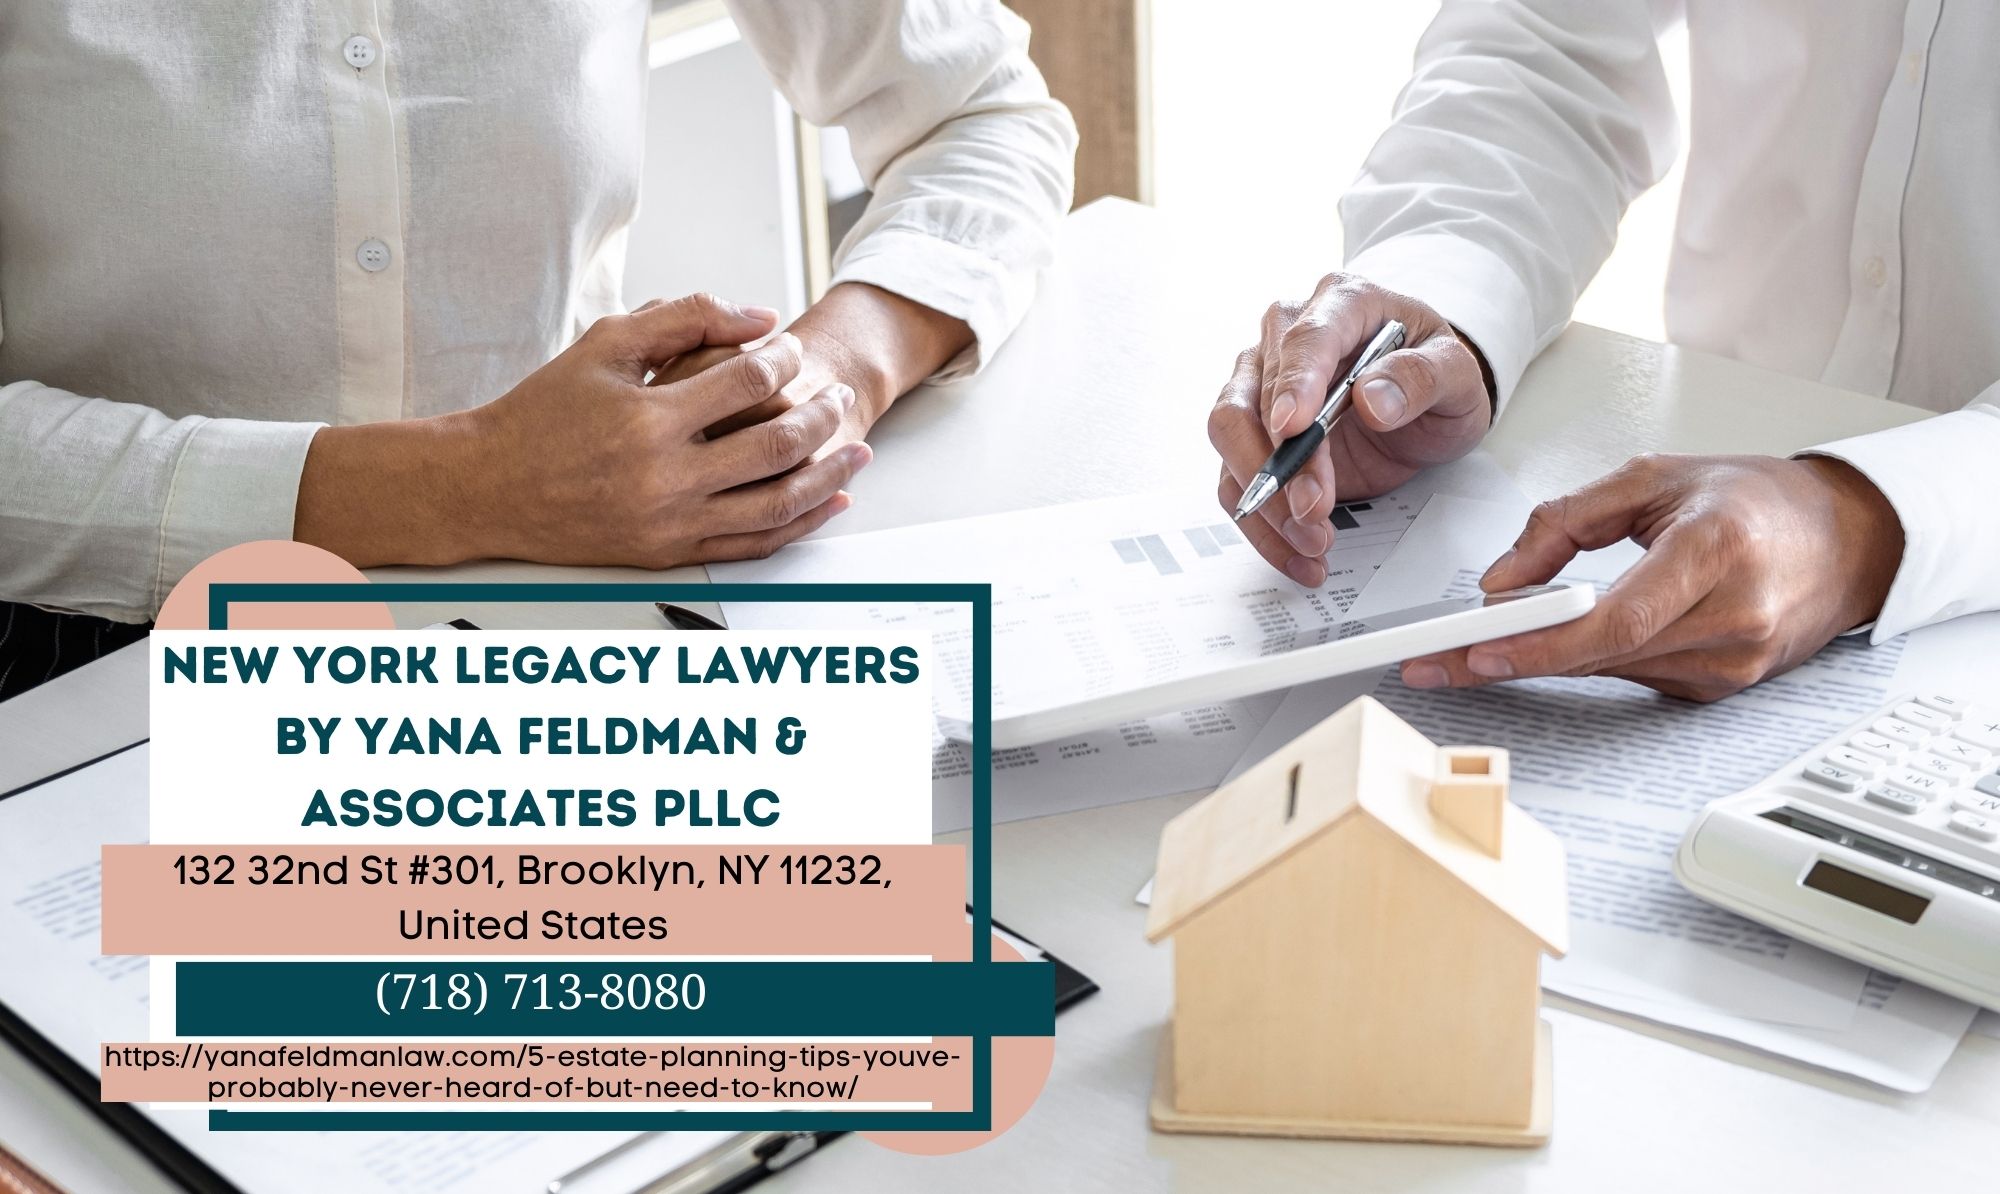 New York Estate Planning Attorney Yana Feldman Reveals Essential Tips in Newly Released Article